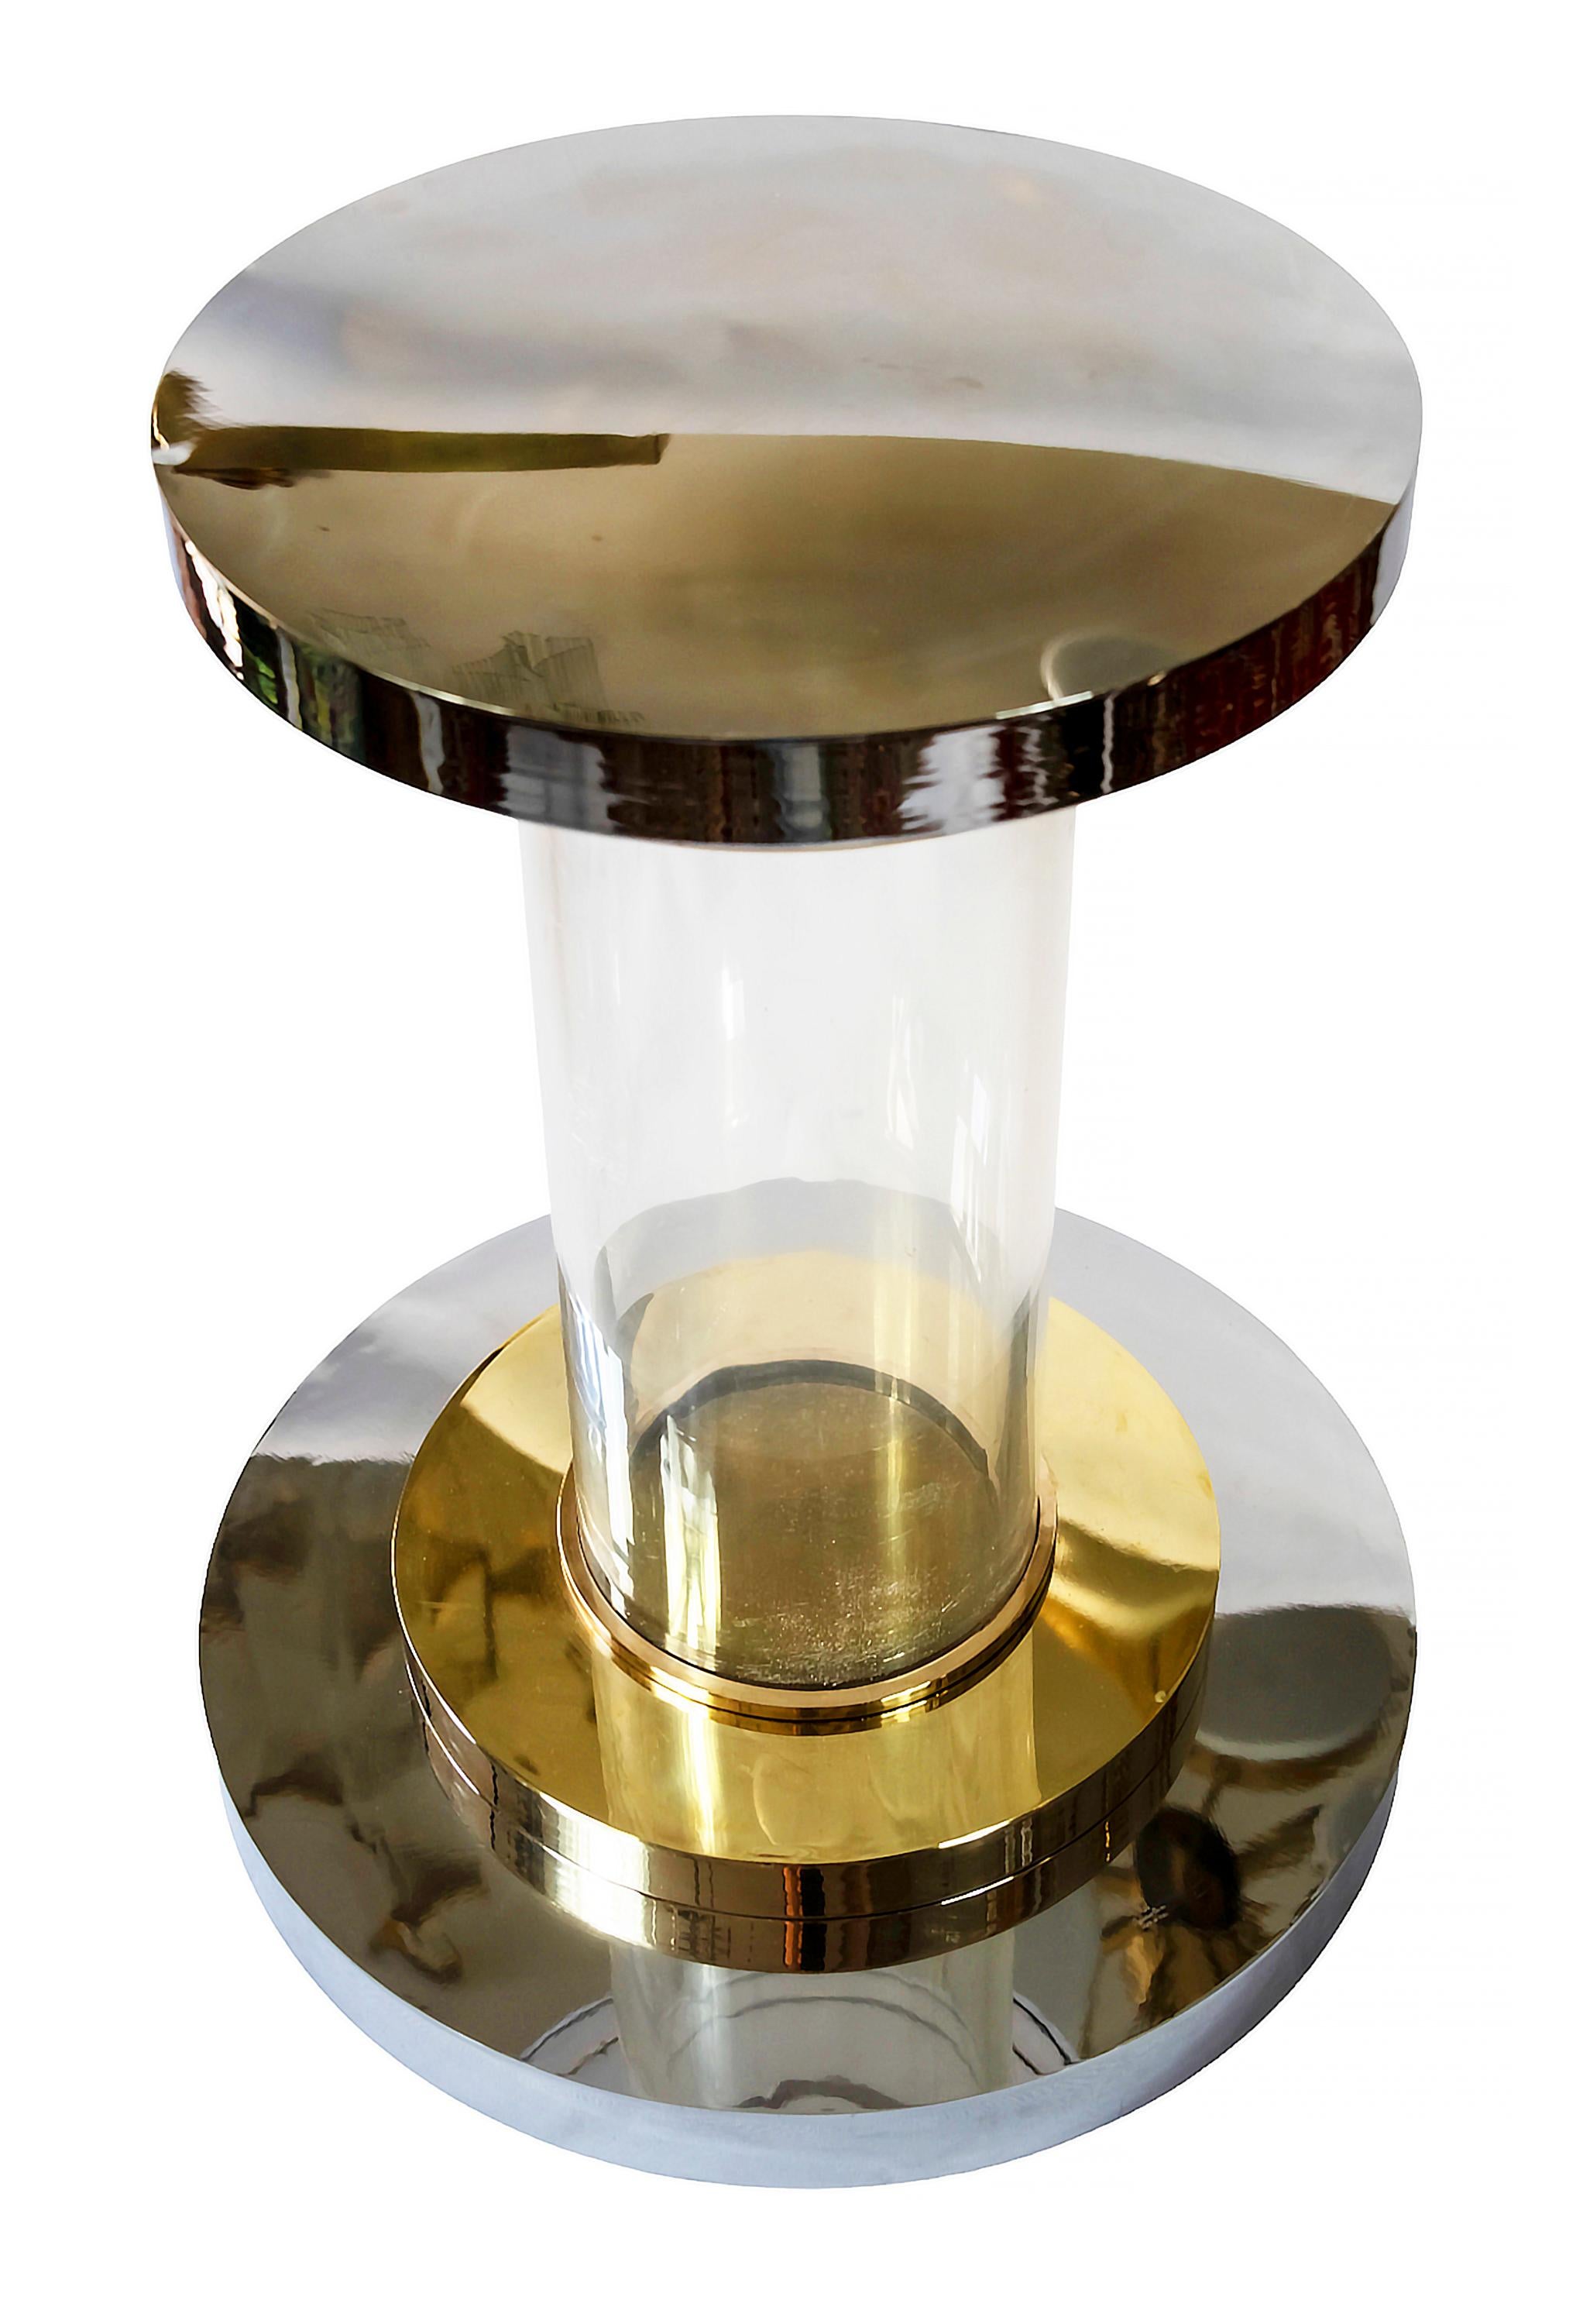 20th Century Italian Brass, Chrome and Lucite Table Base Signed Romeo Rega, from, 1970s For Sale